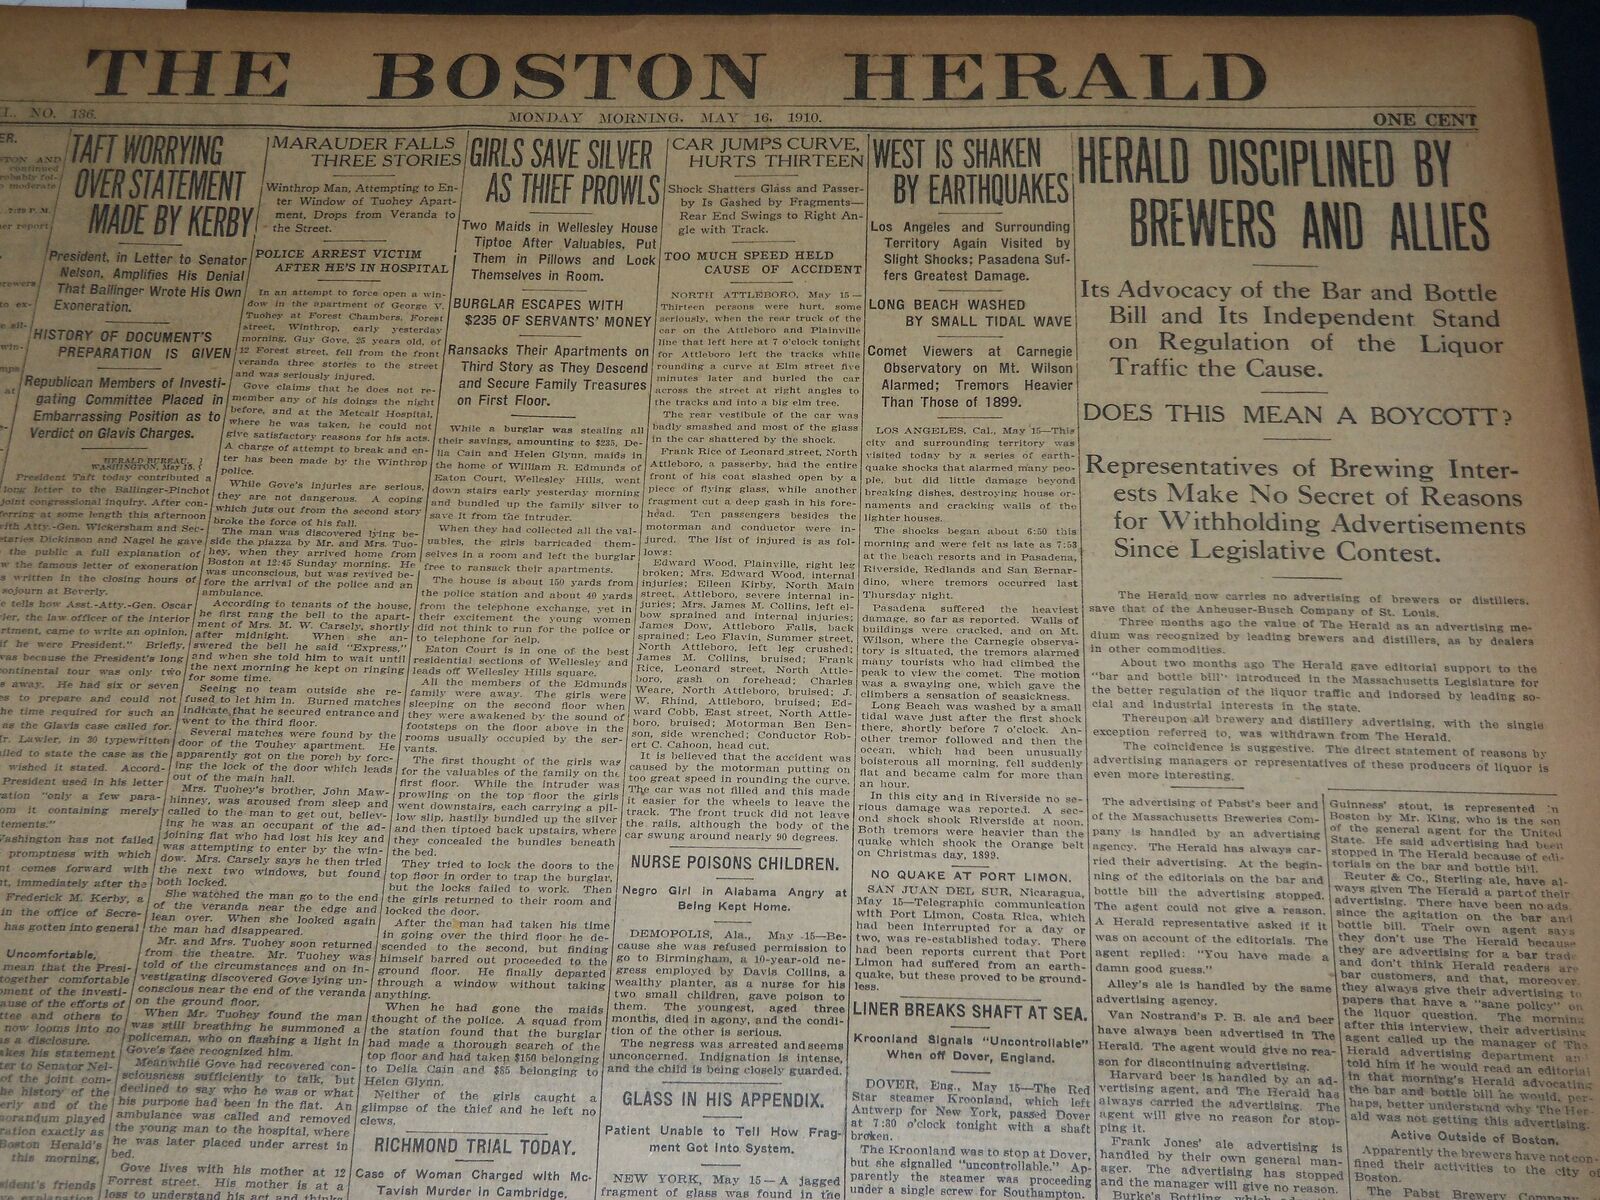 1910 MAY 16 THE BOSTON HERALD - PERIL IN COMET'S APPROACH TO EARTH - BH 359